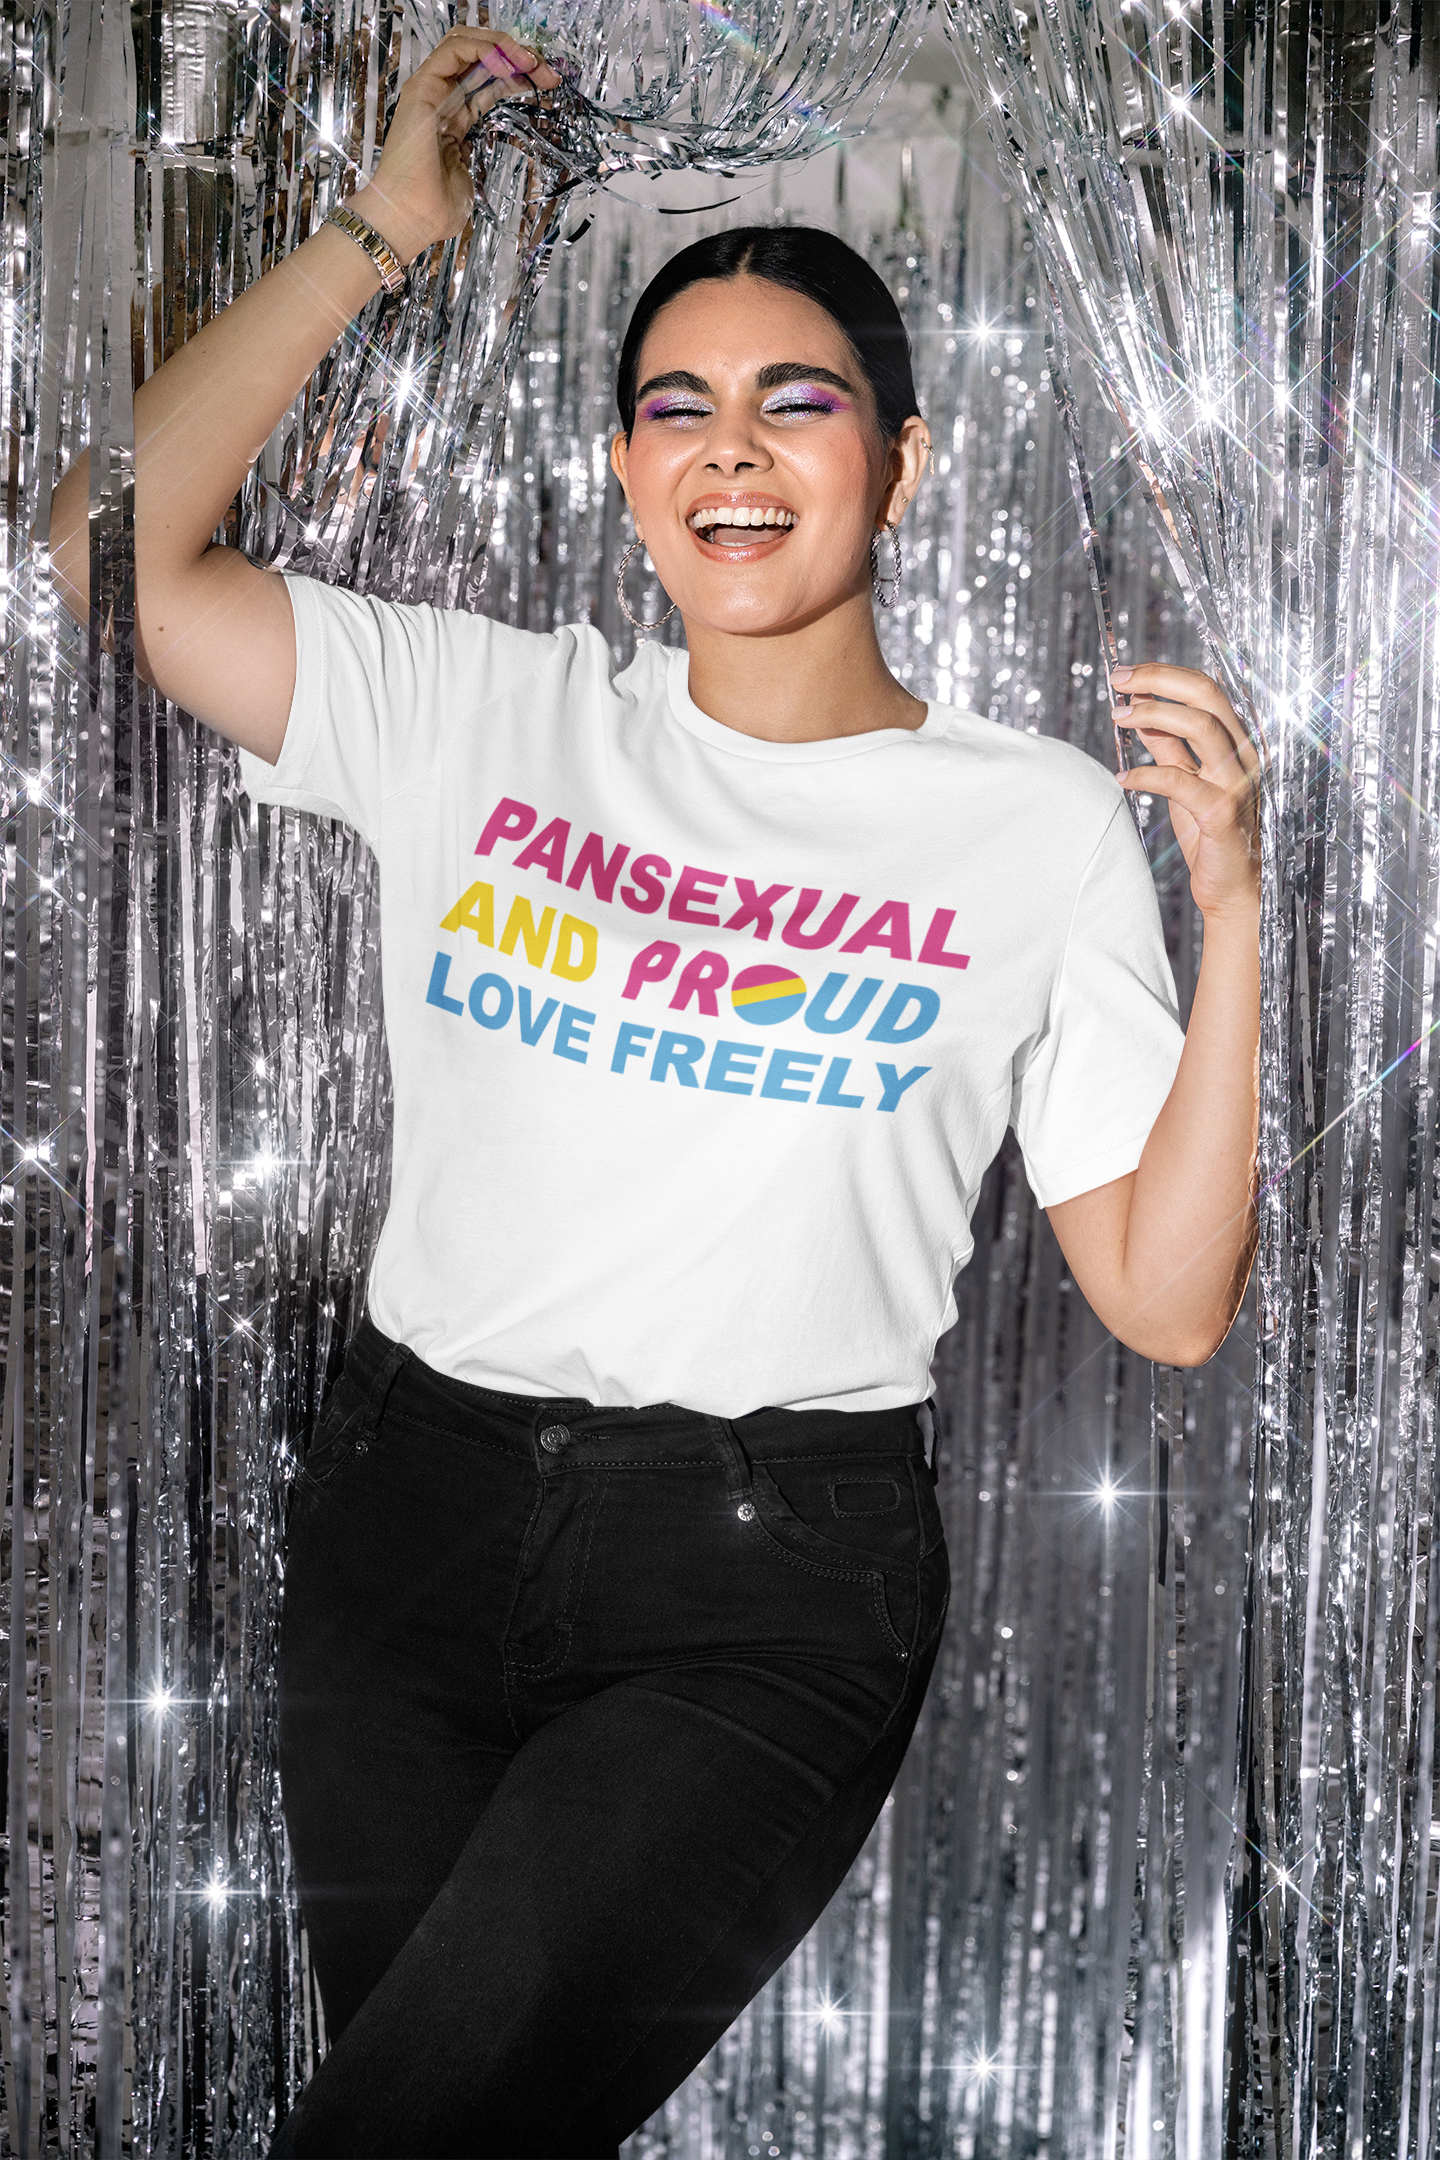 PROUD Freely Pansexual T-Shirt